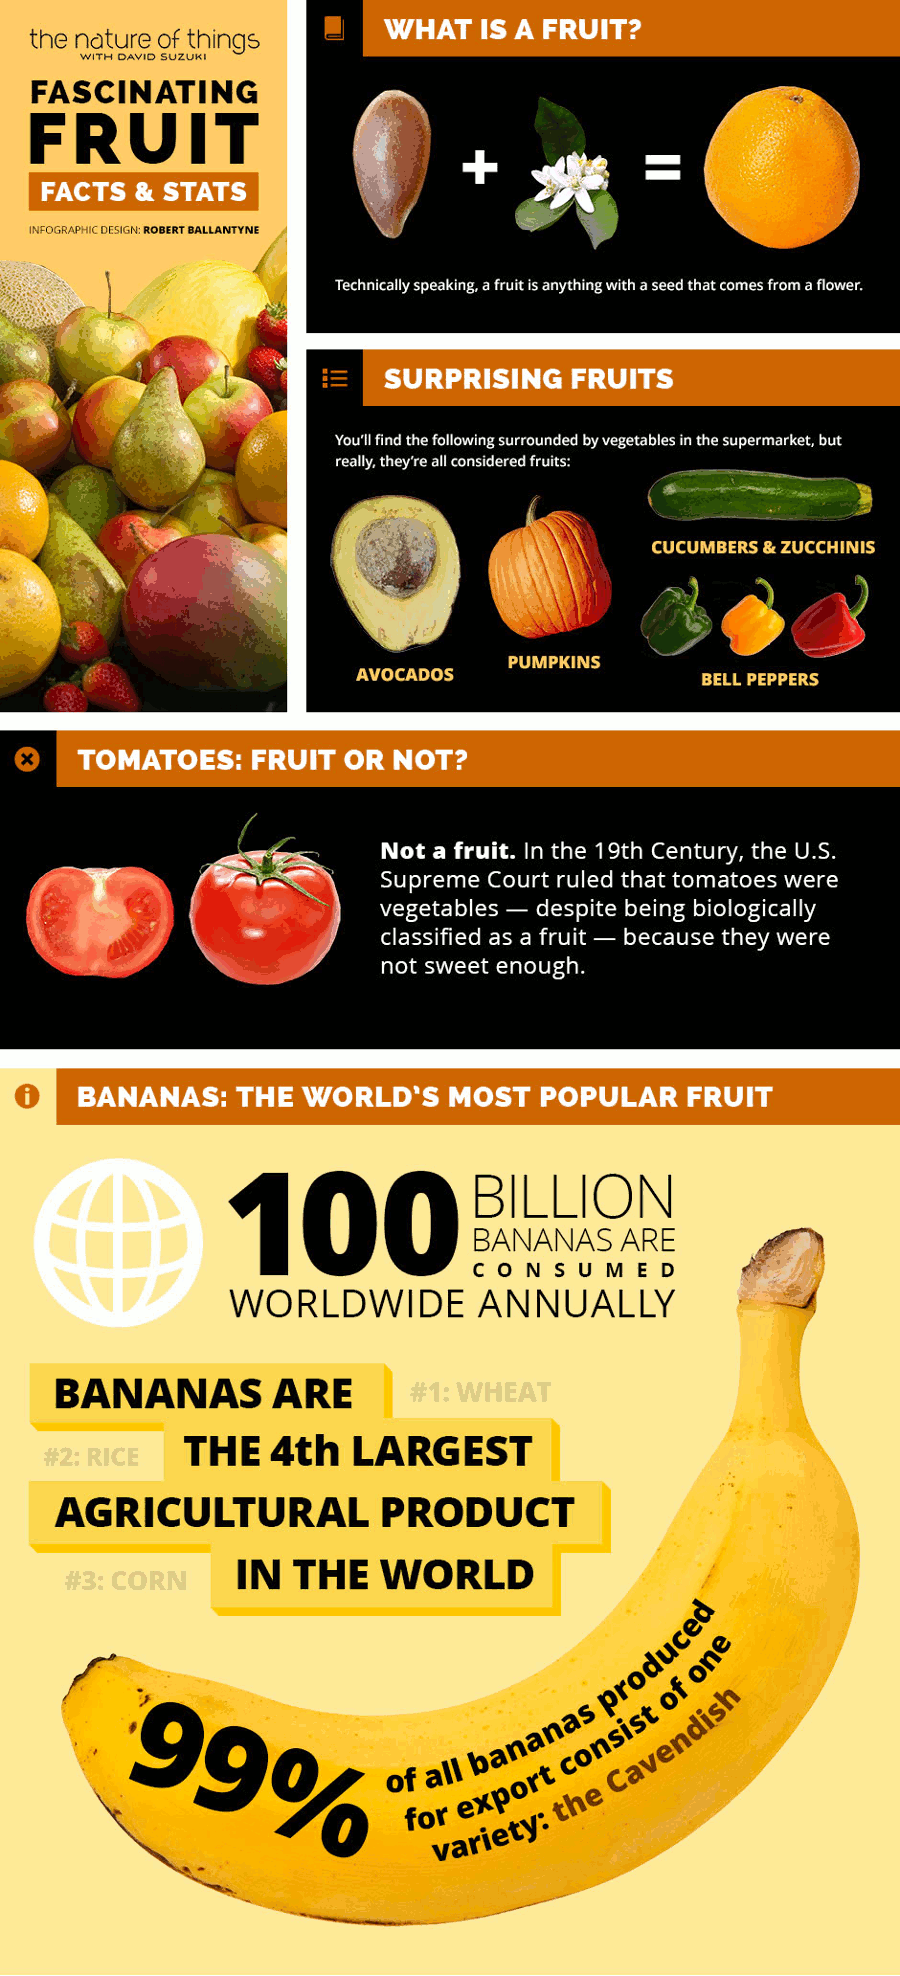 Fascinating Fruit Facts And Stats